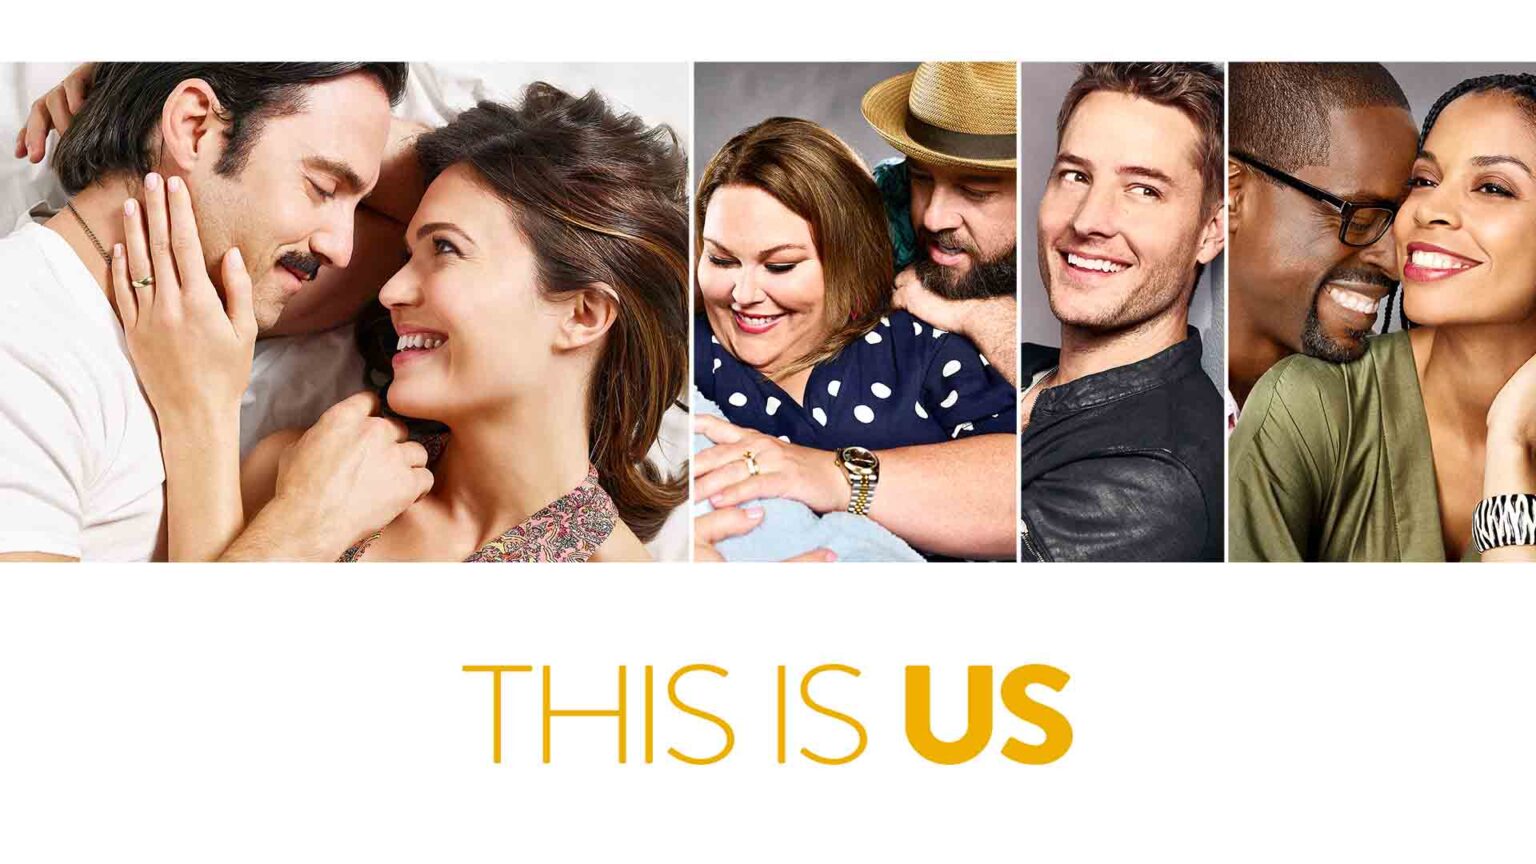 Break out the tissues: we’re tackling 'This is Us' episodes. Here are some of our favorite moments from 'This is Us' that highlight these lessons.